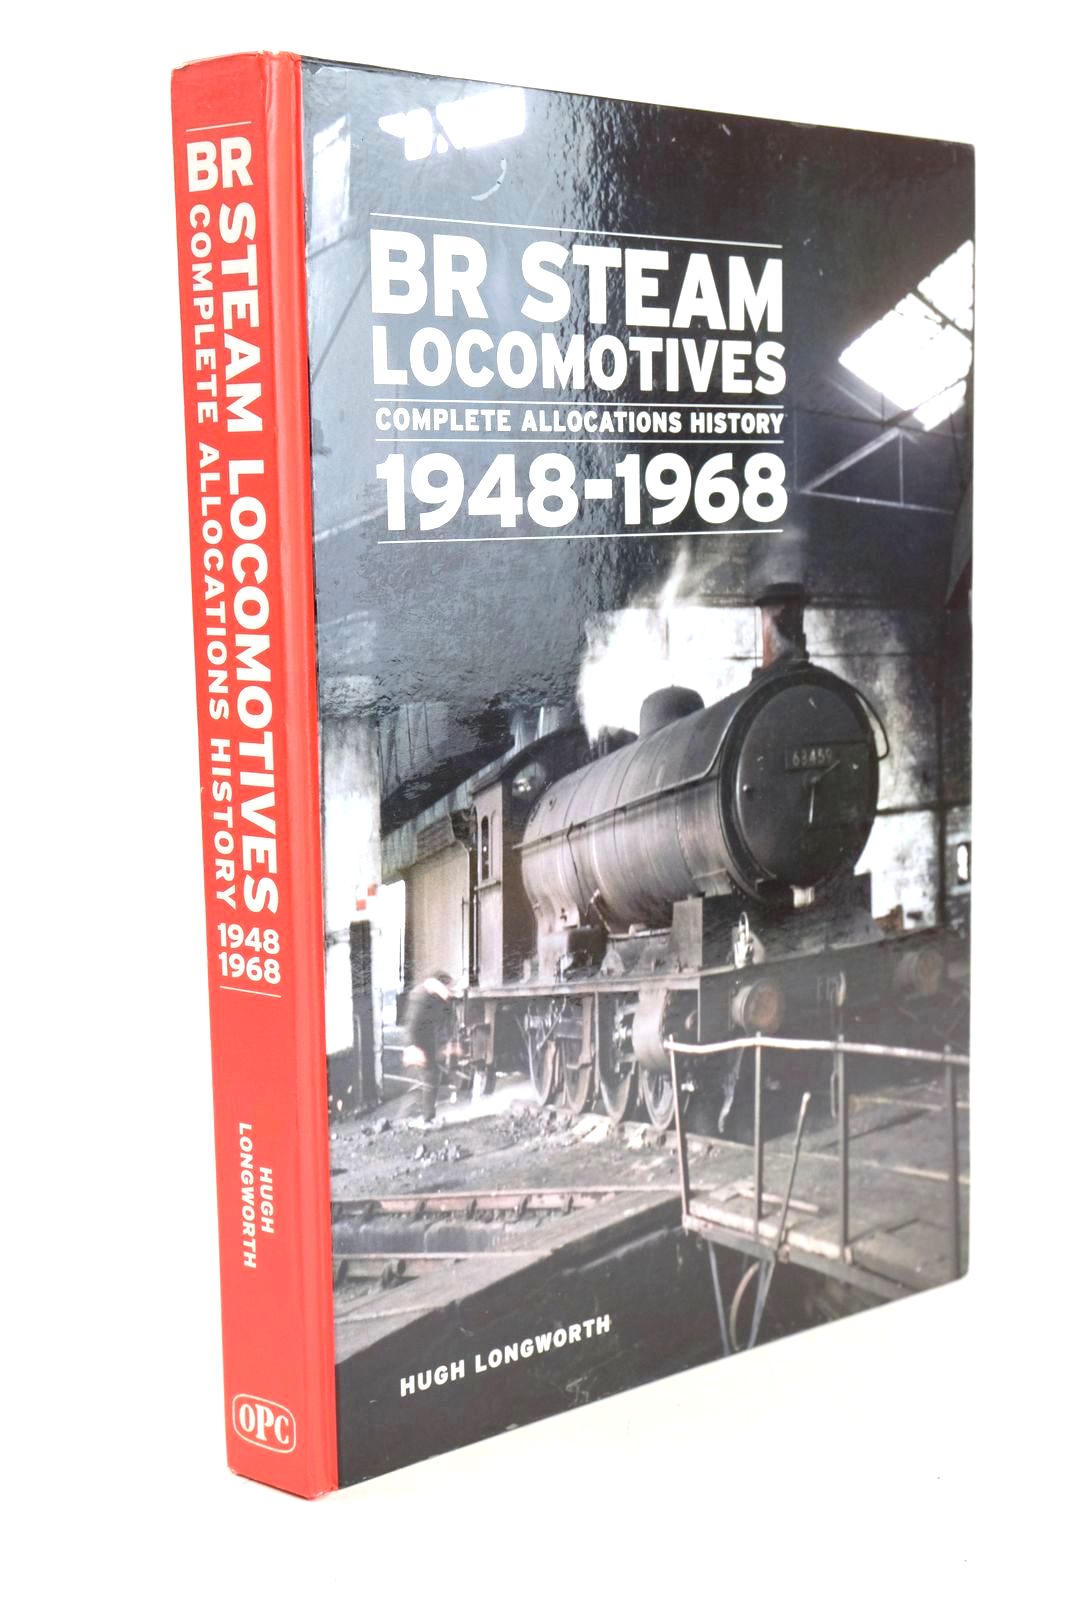 Photo of BR STEAM LOCOMOTIVES COMPLETE ALLOCATIONS HISTORY 1948-1968 written by Longworth, Hugh published by Oxford Publishing Co (STOCK CODE: 1326800)  for sale by Stella & Rose's Books